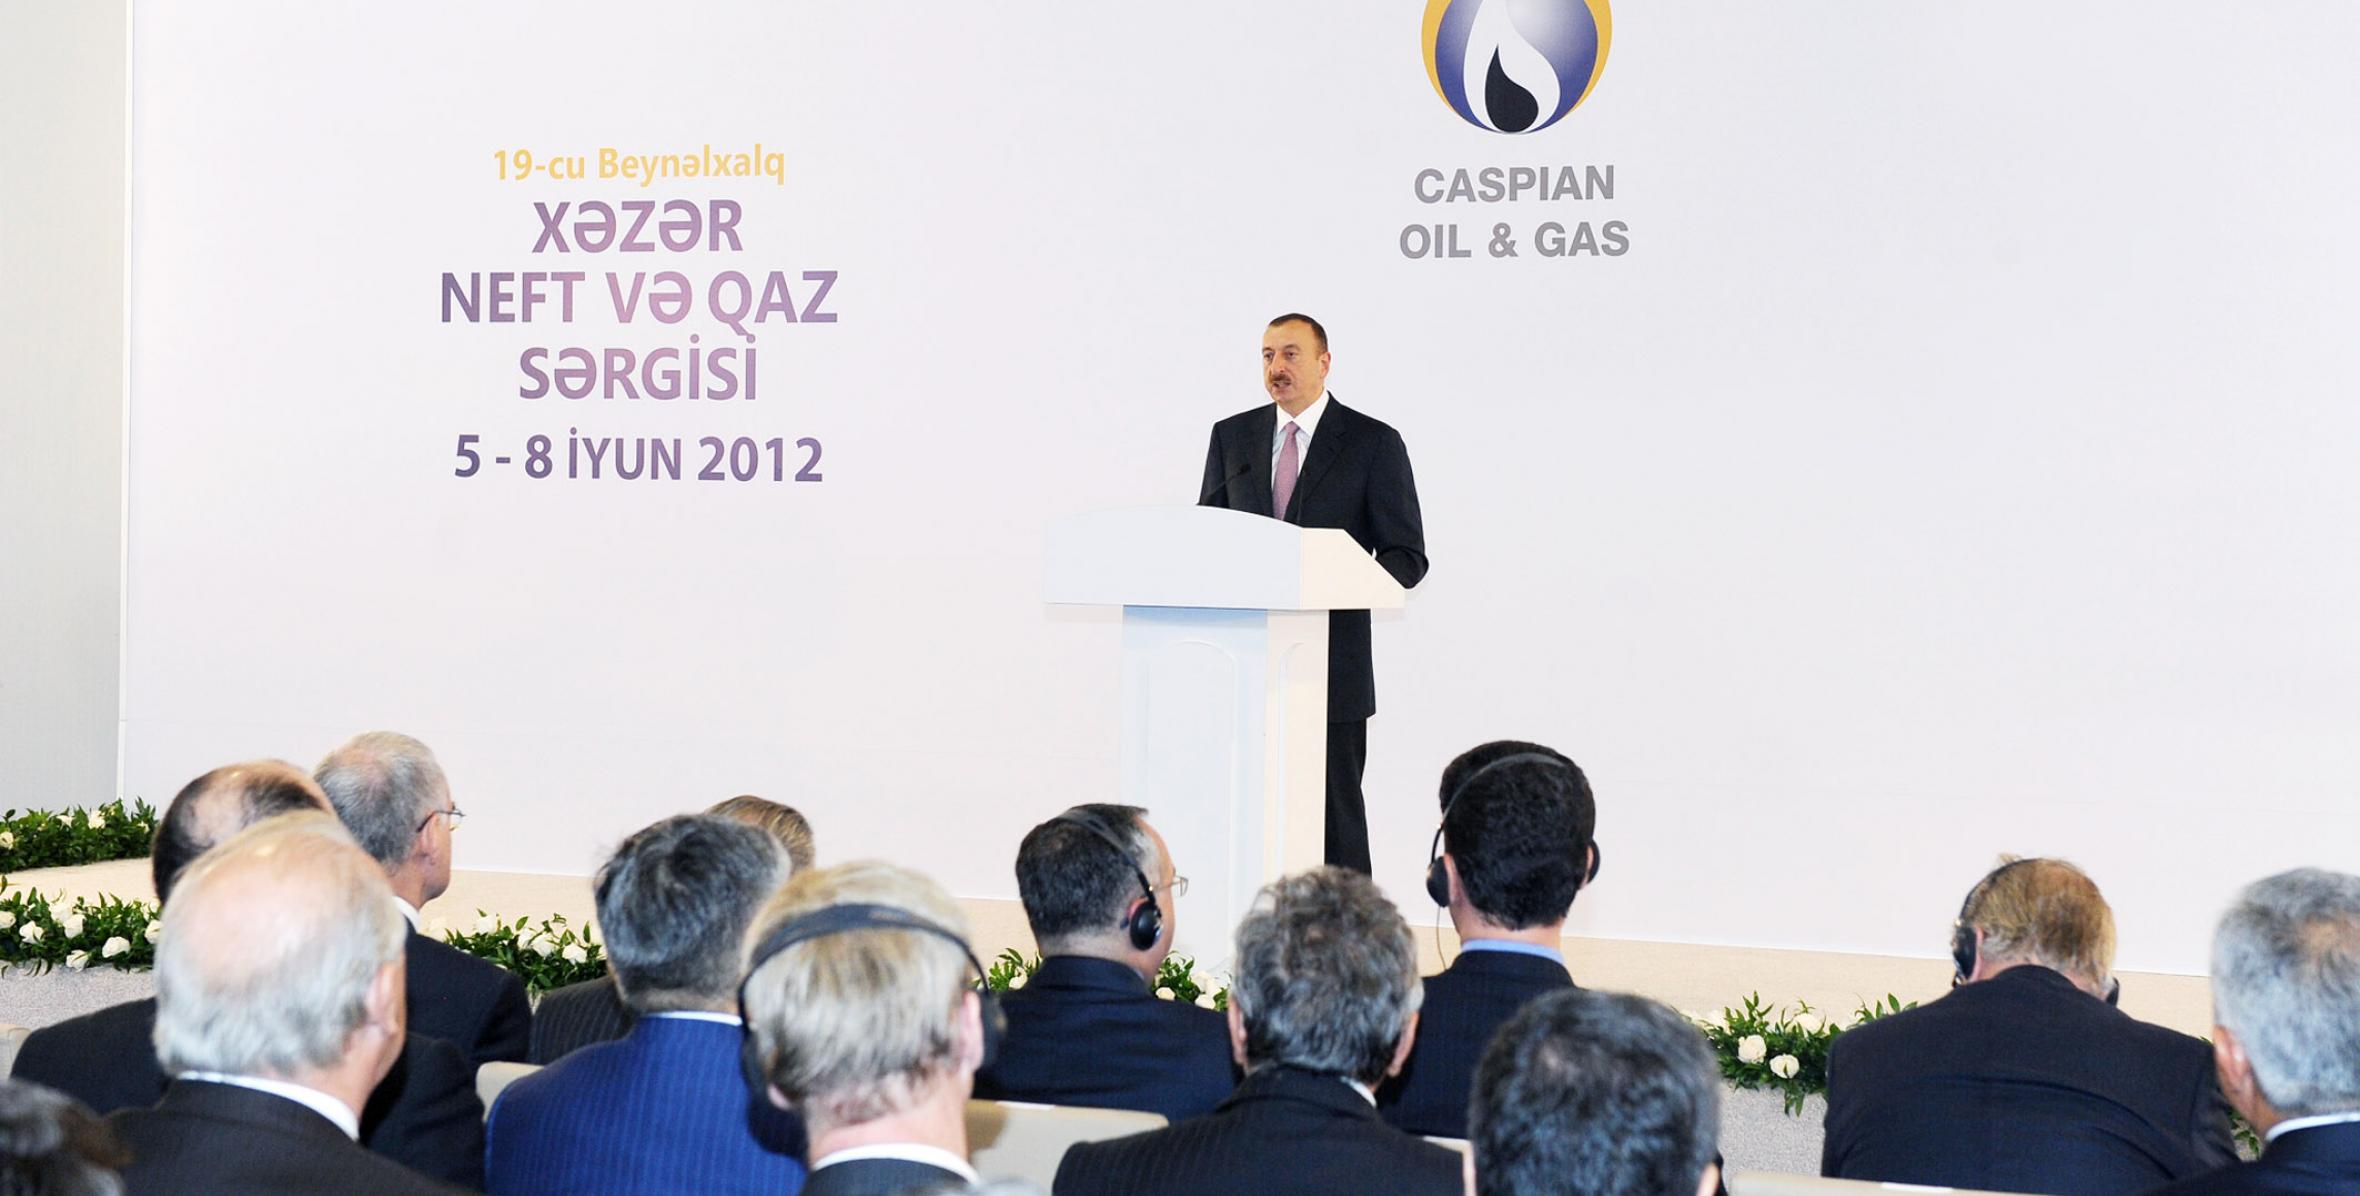 Speech by Ilham Aliyev at the opening in Baku of the 19th International Exhibition and Conference “Caspian Oil and Gas: Refining and Petrochemicals – 2012”